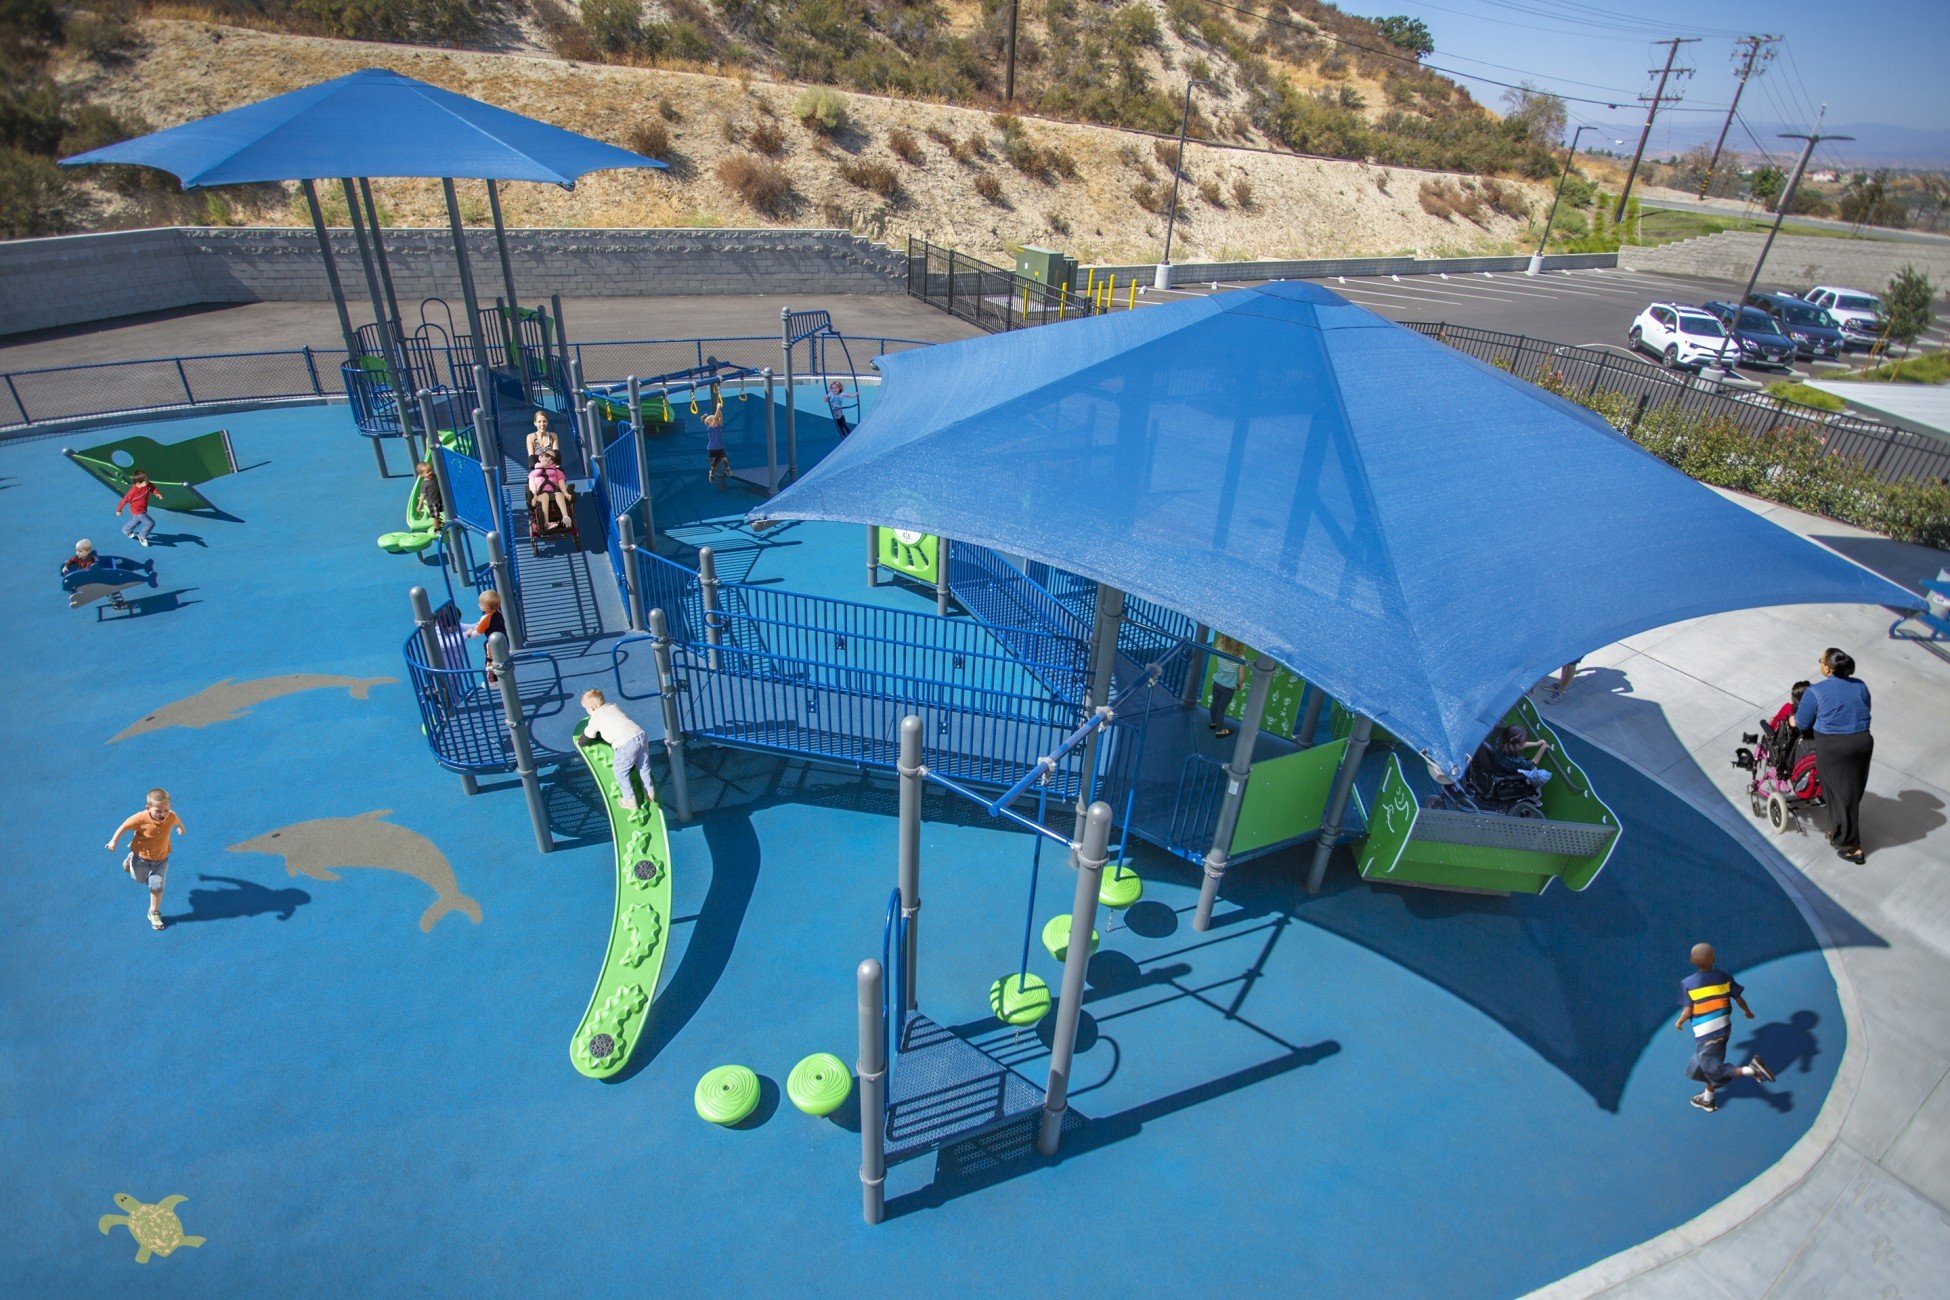 Featured image of aerial view of blue colored park on blue turf with children playing on it